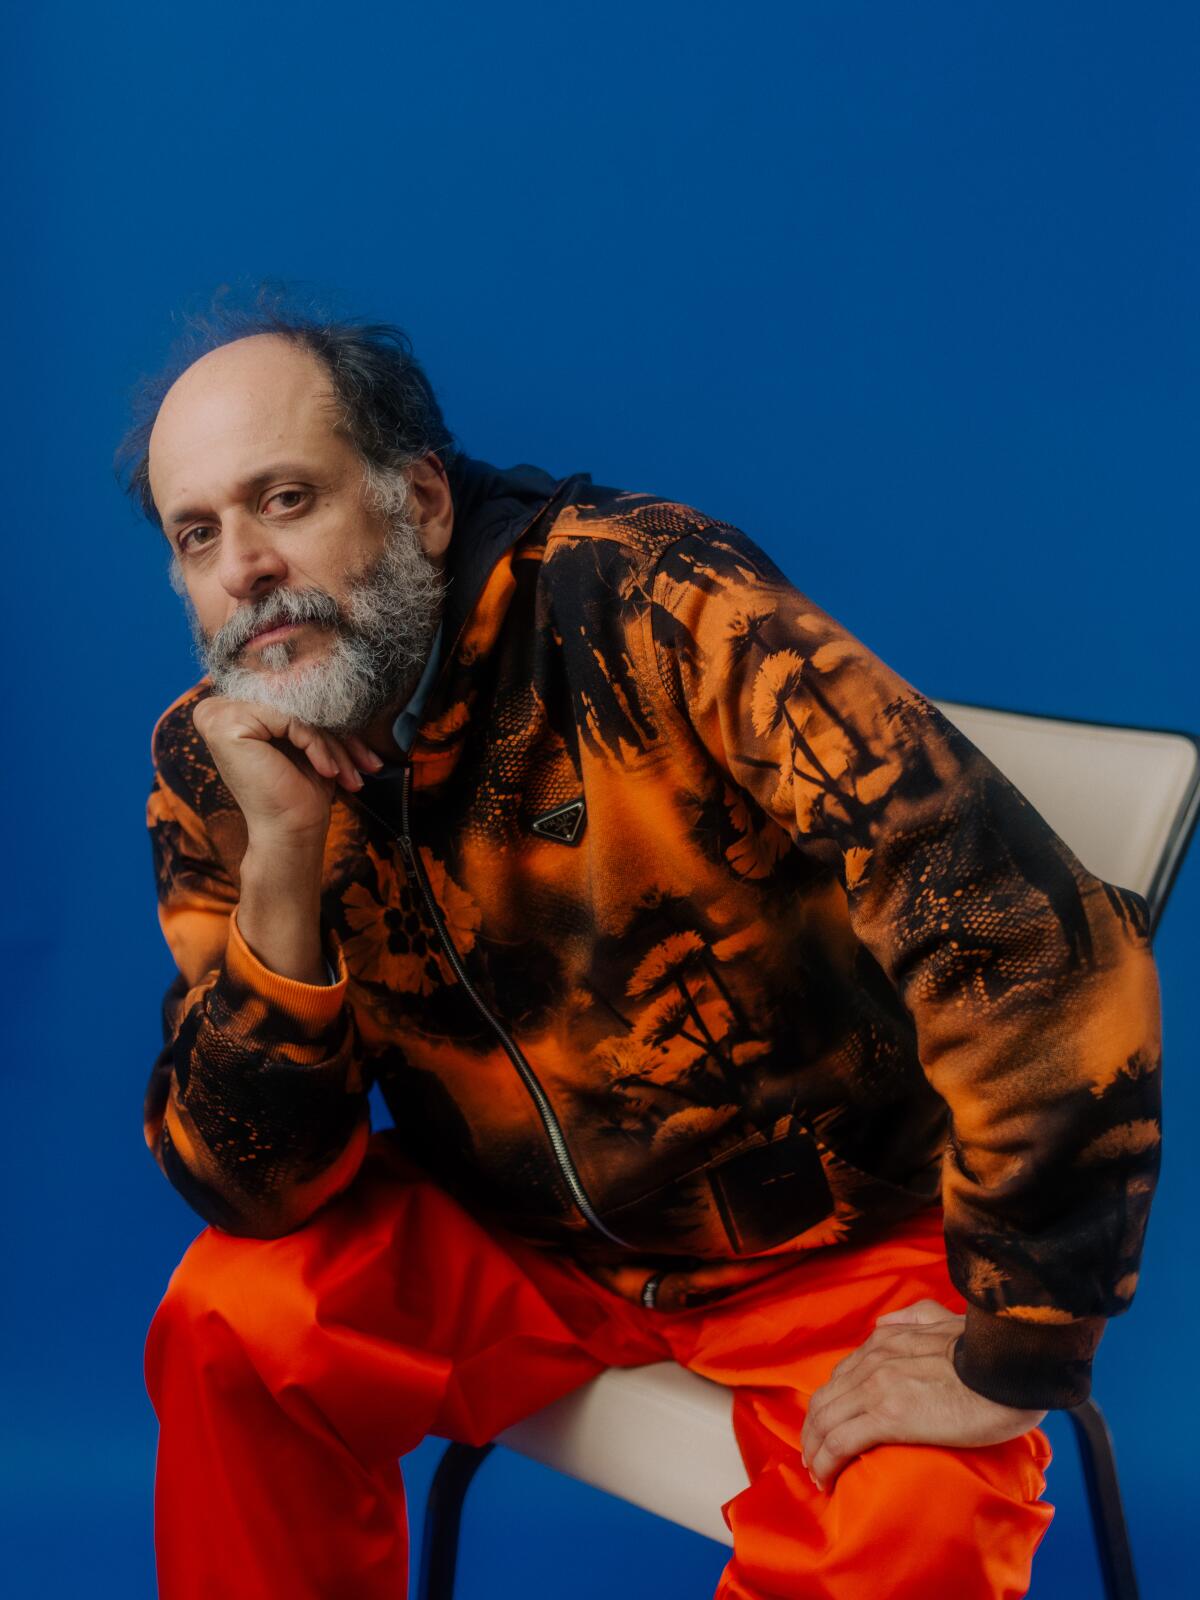 Luca Guadagnino wears bright clothing and rests his elbow on his knee and his chin on his hand for a portrait.